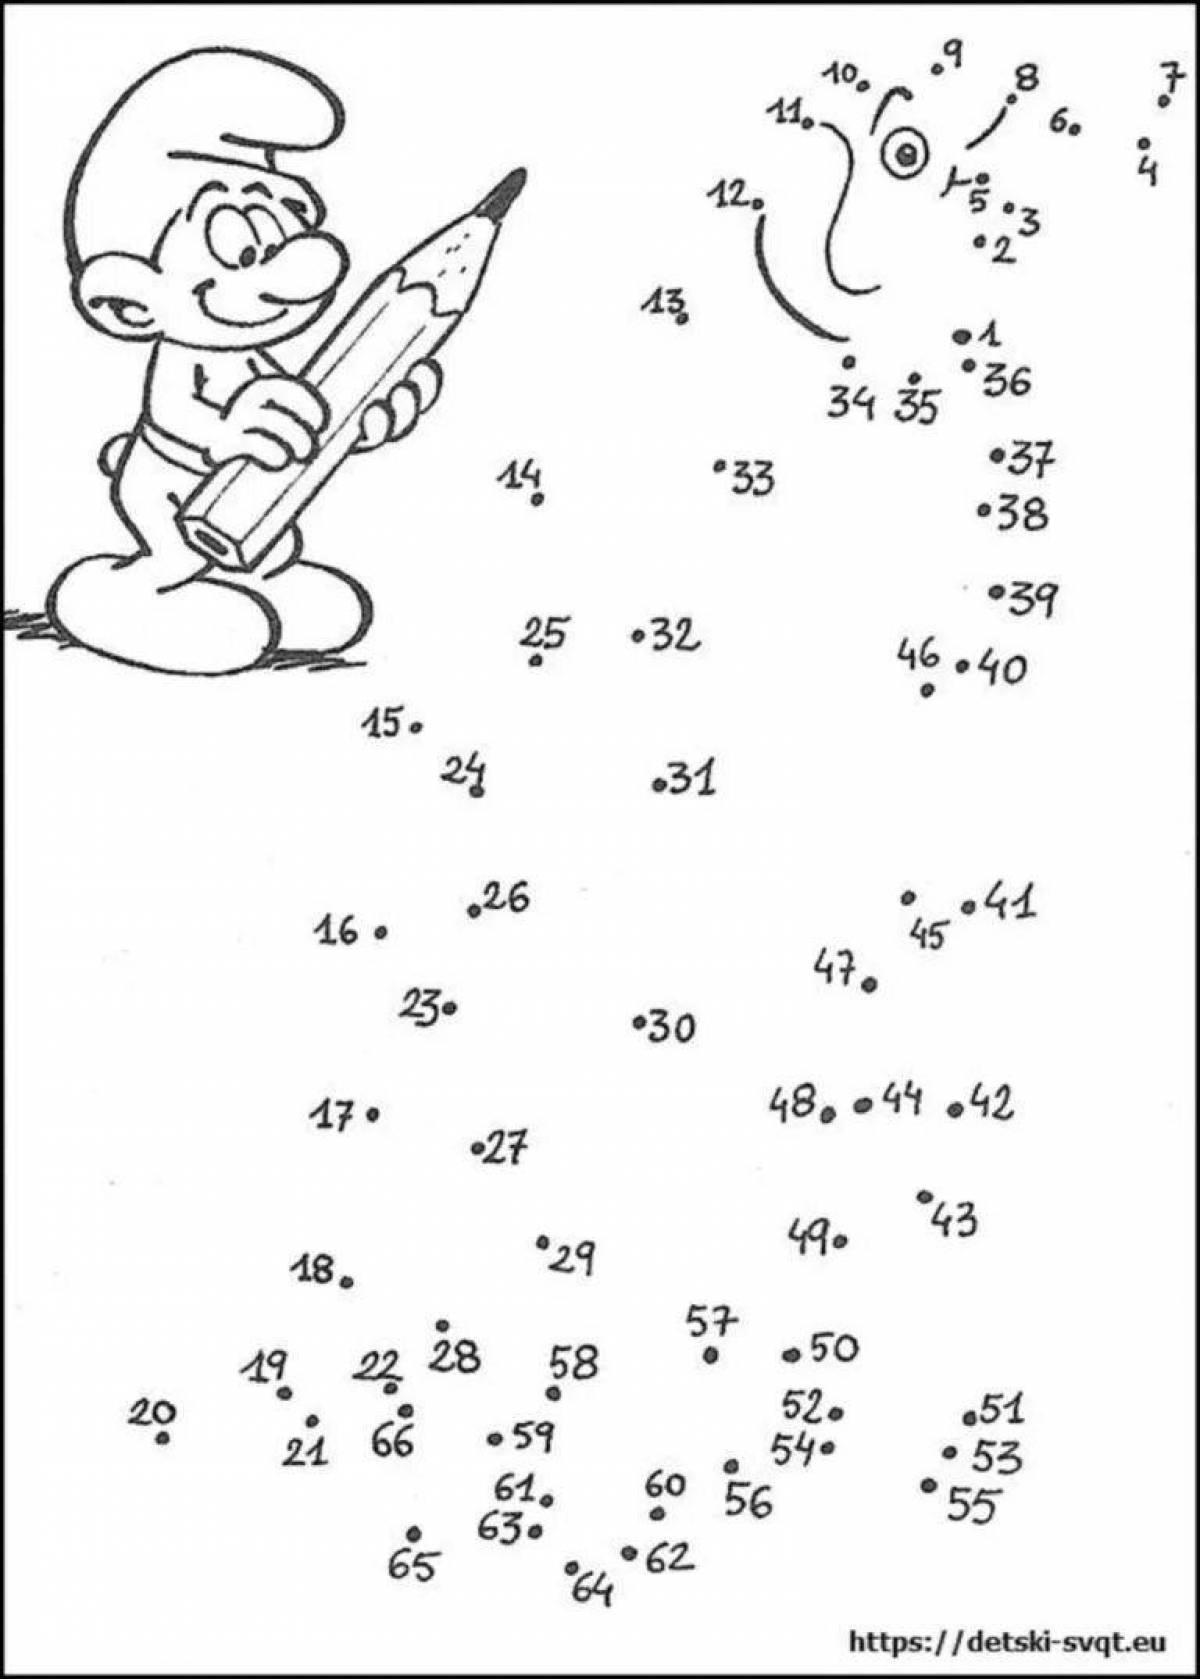 A fun math coloring book for grade 1 with dots and shapes